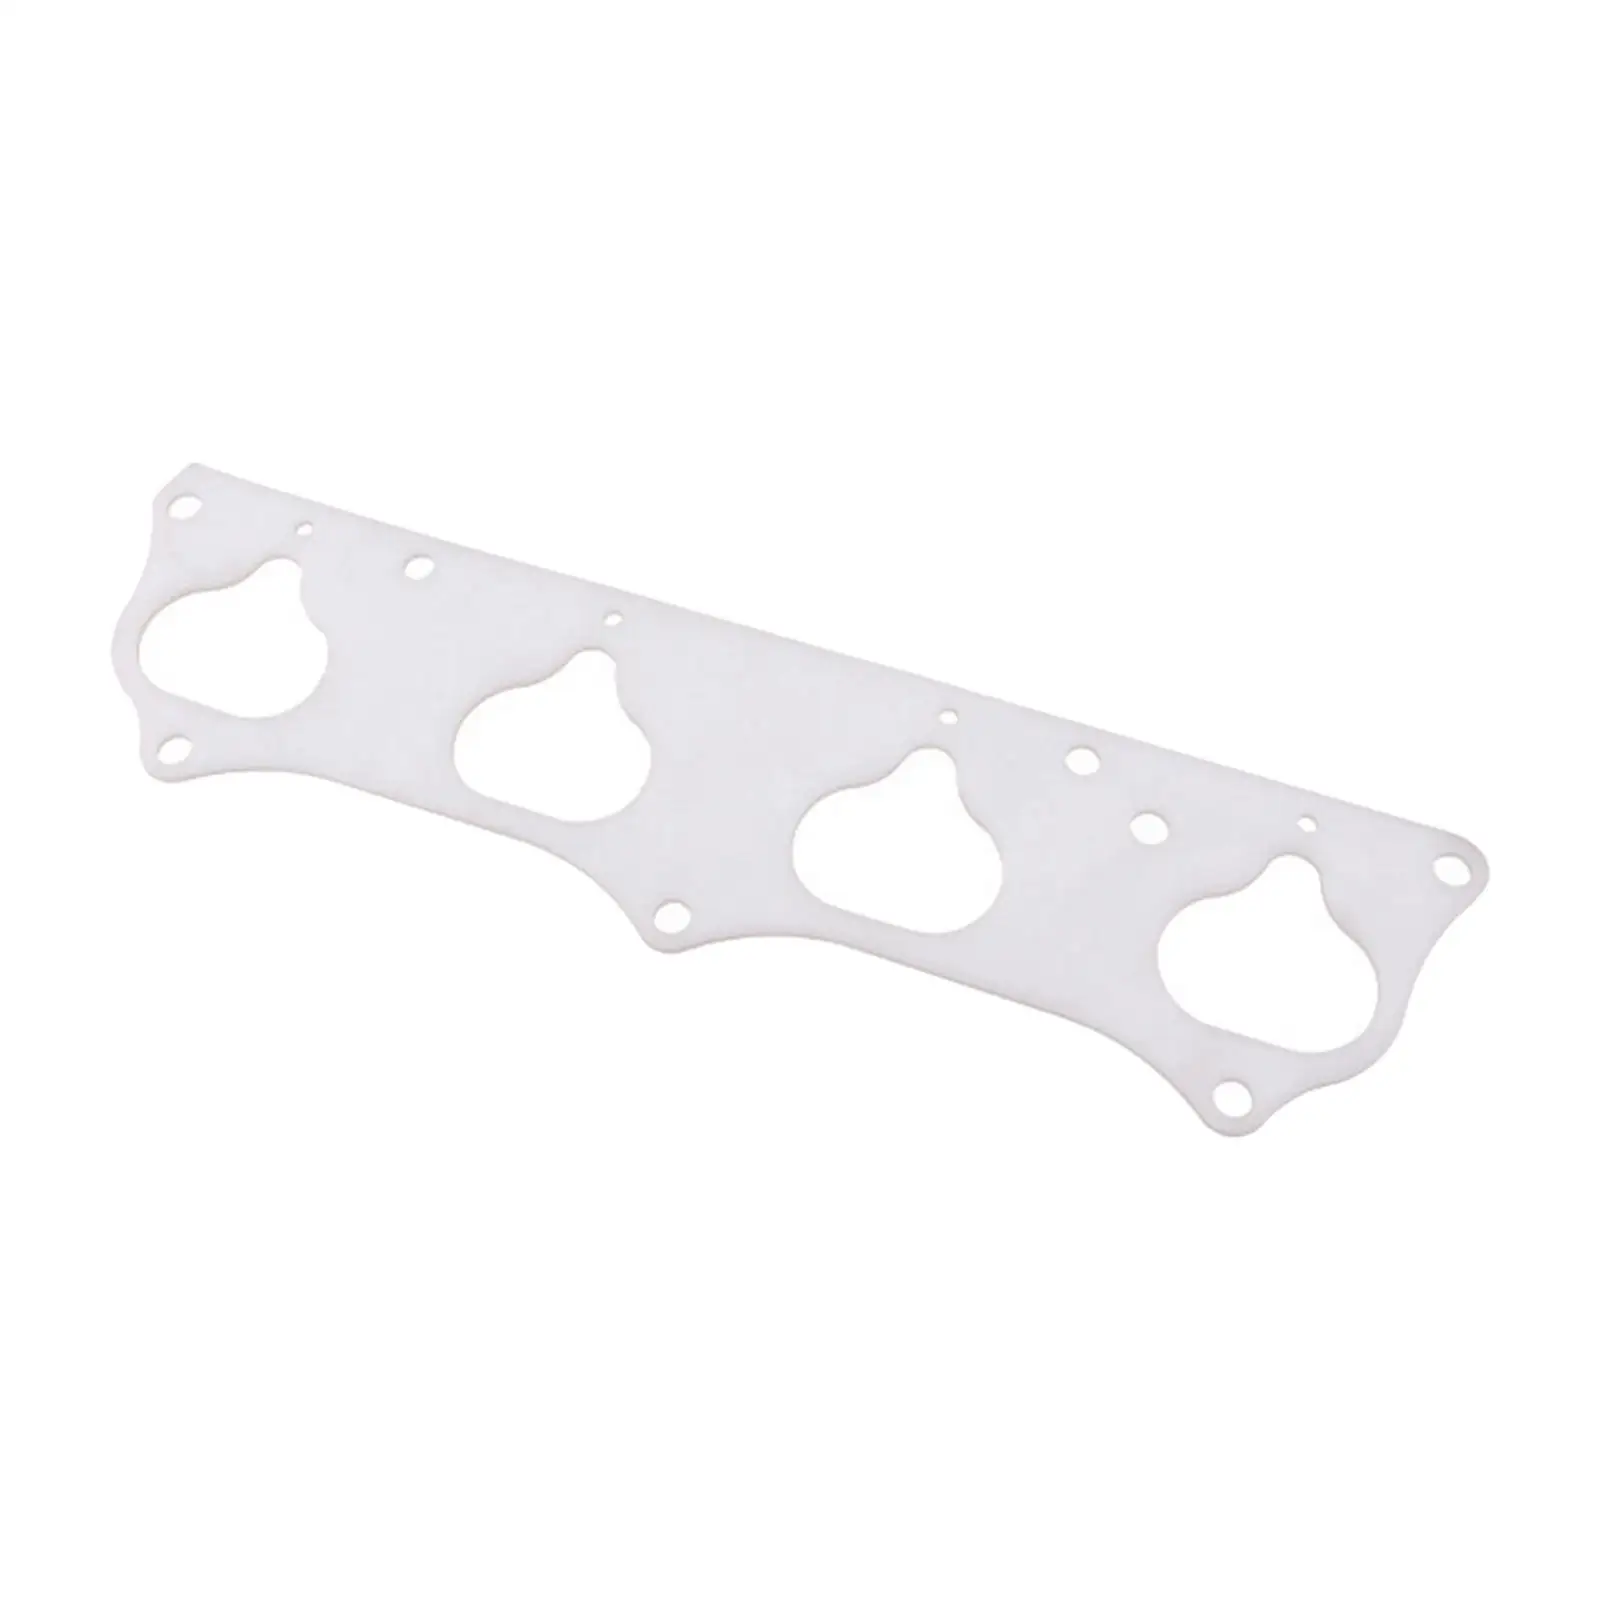 Thermal Intake Manifold Heat Shield Gasket Premium Durable Spare Parts Replaces Accessories for Swap K20A/A2/A3/Z1 K-series